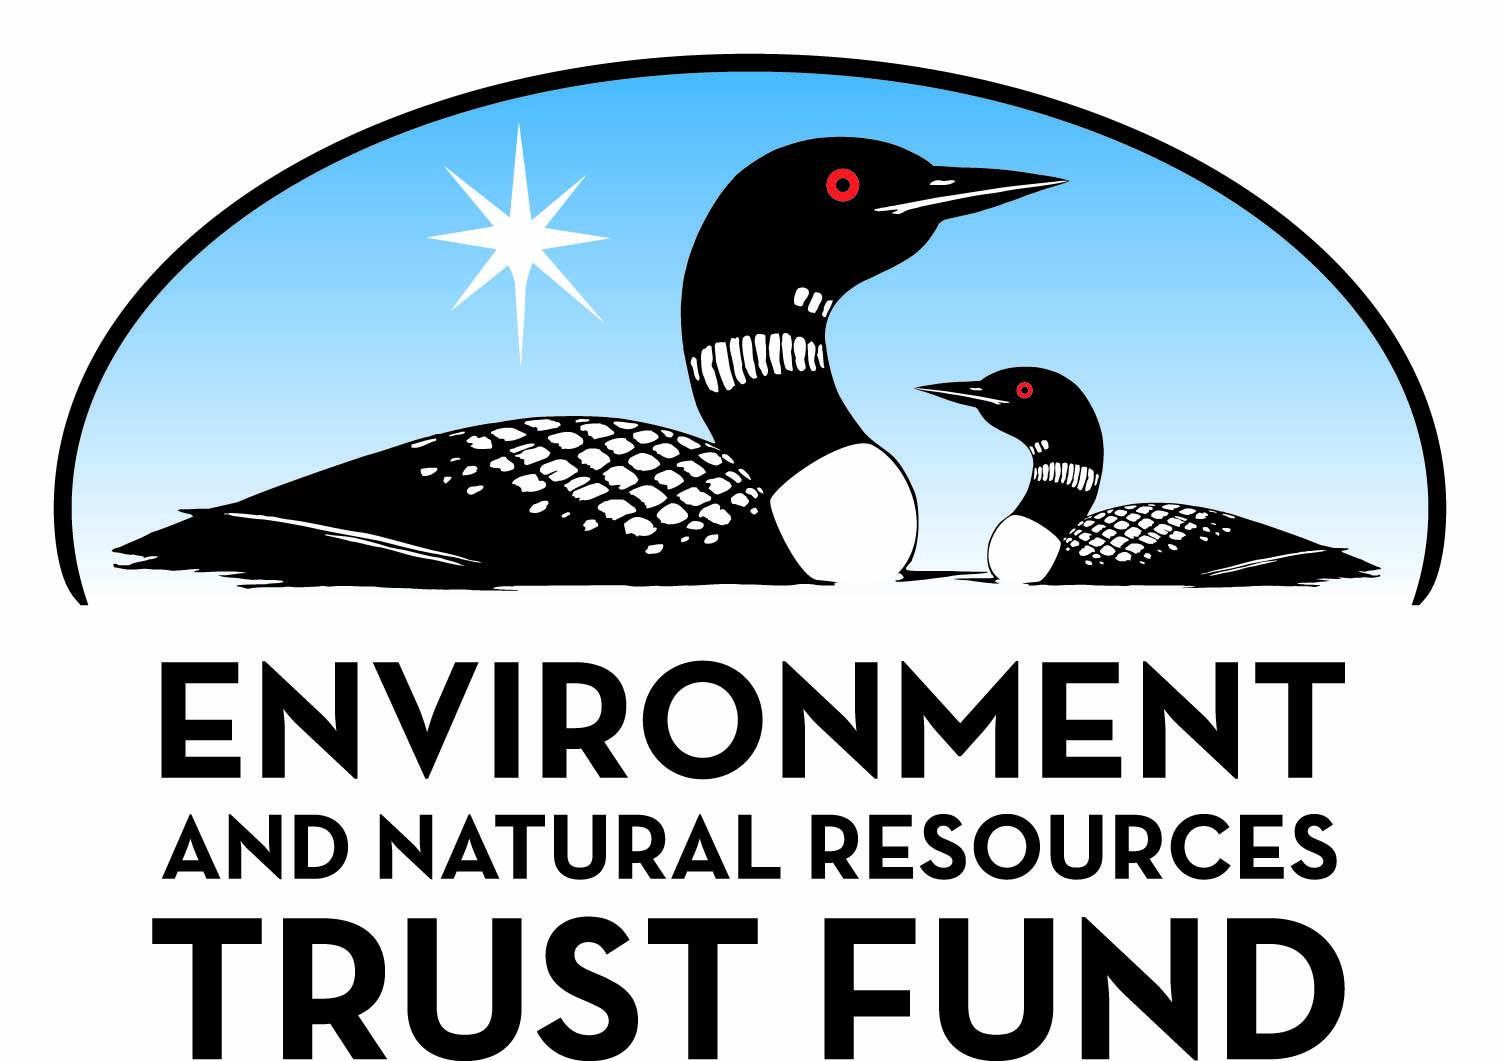 Environmental and natural resources trust fund